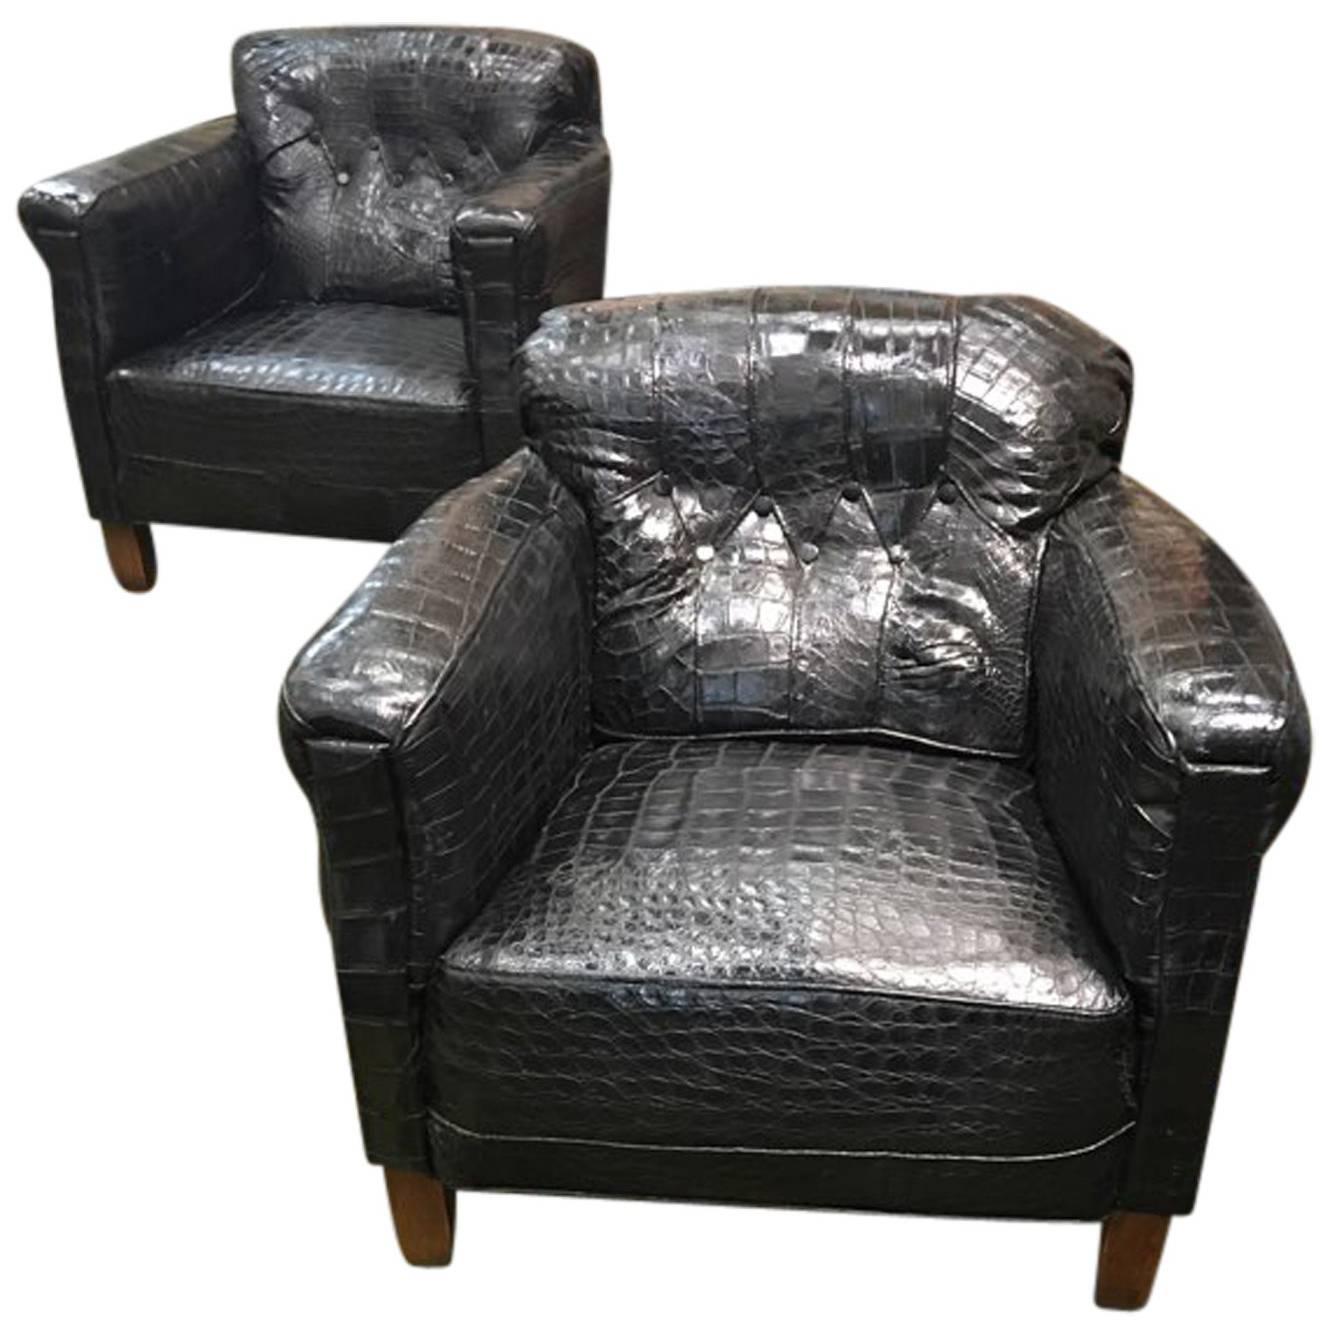 Pair of French Art Deco Framed Black Alligator Upholstered Lounge Chairs